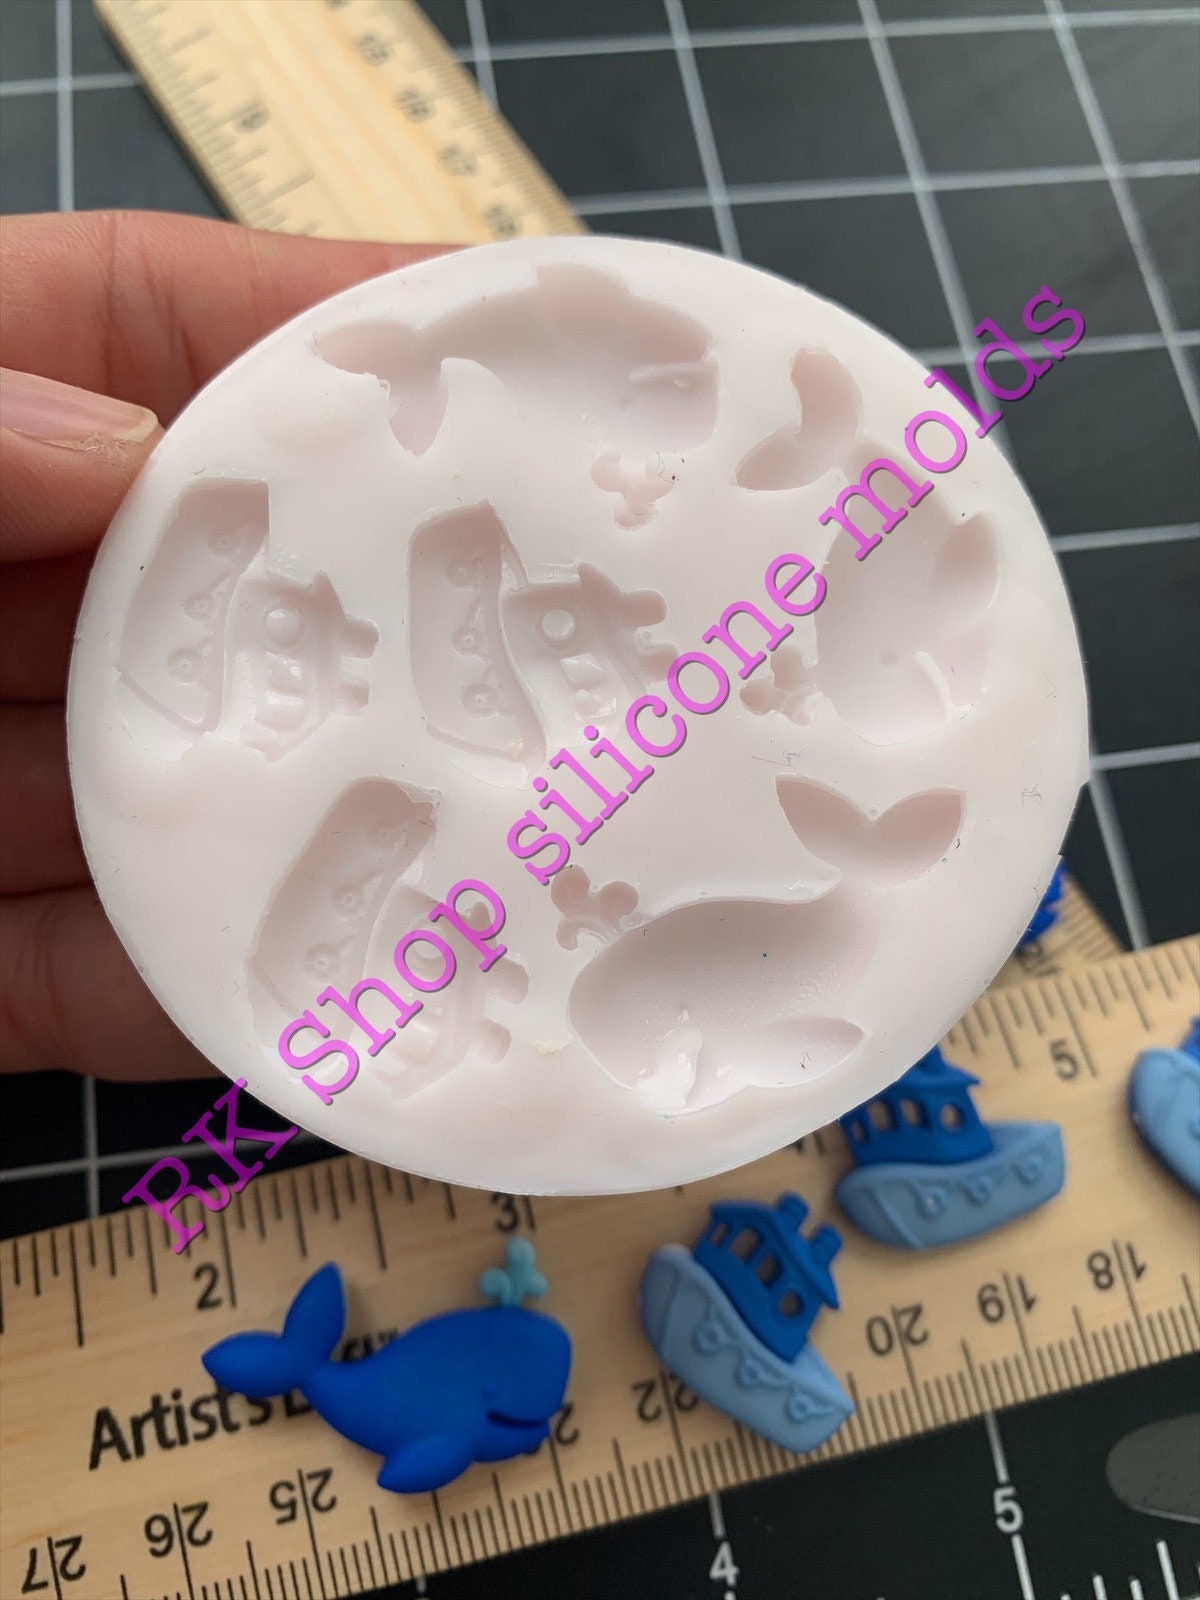  Soap Molds Silicone Shapes, Purple 4 Cavities Silicone  Massage Soap Molds, 3D Hair Comb Ice Mold, Unique Hair Brush Molds Silicone  For DIY Hair Masks Salon Spa